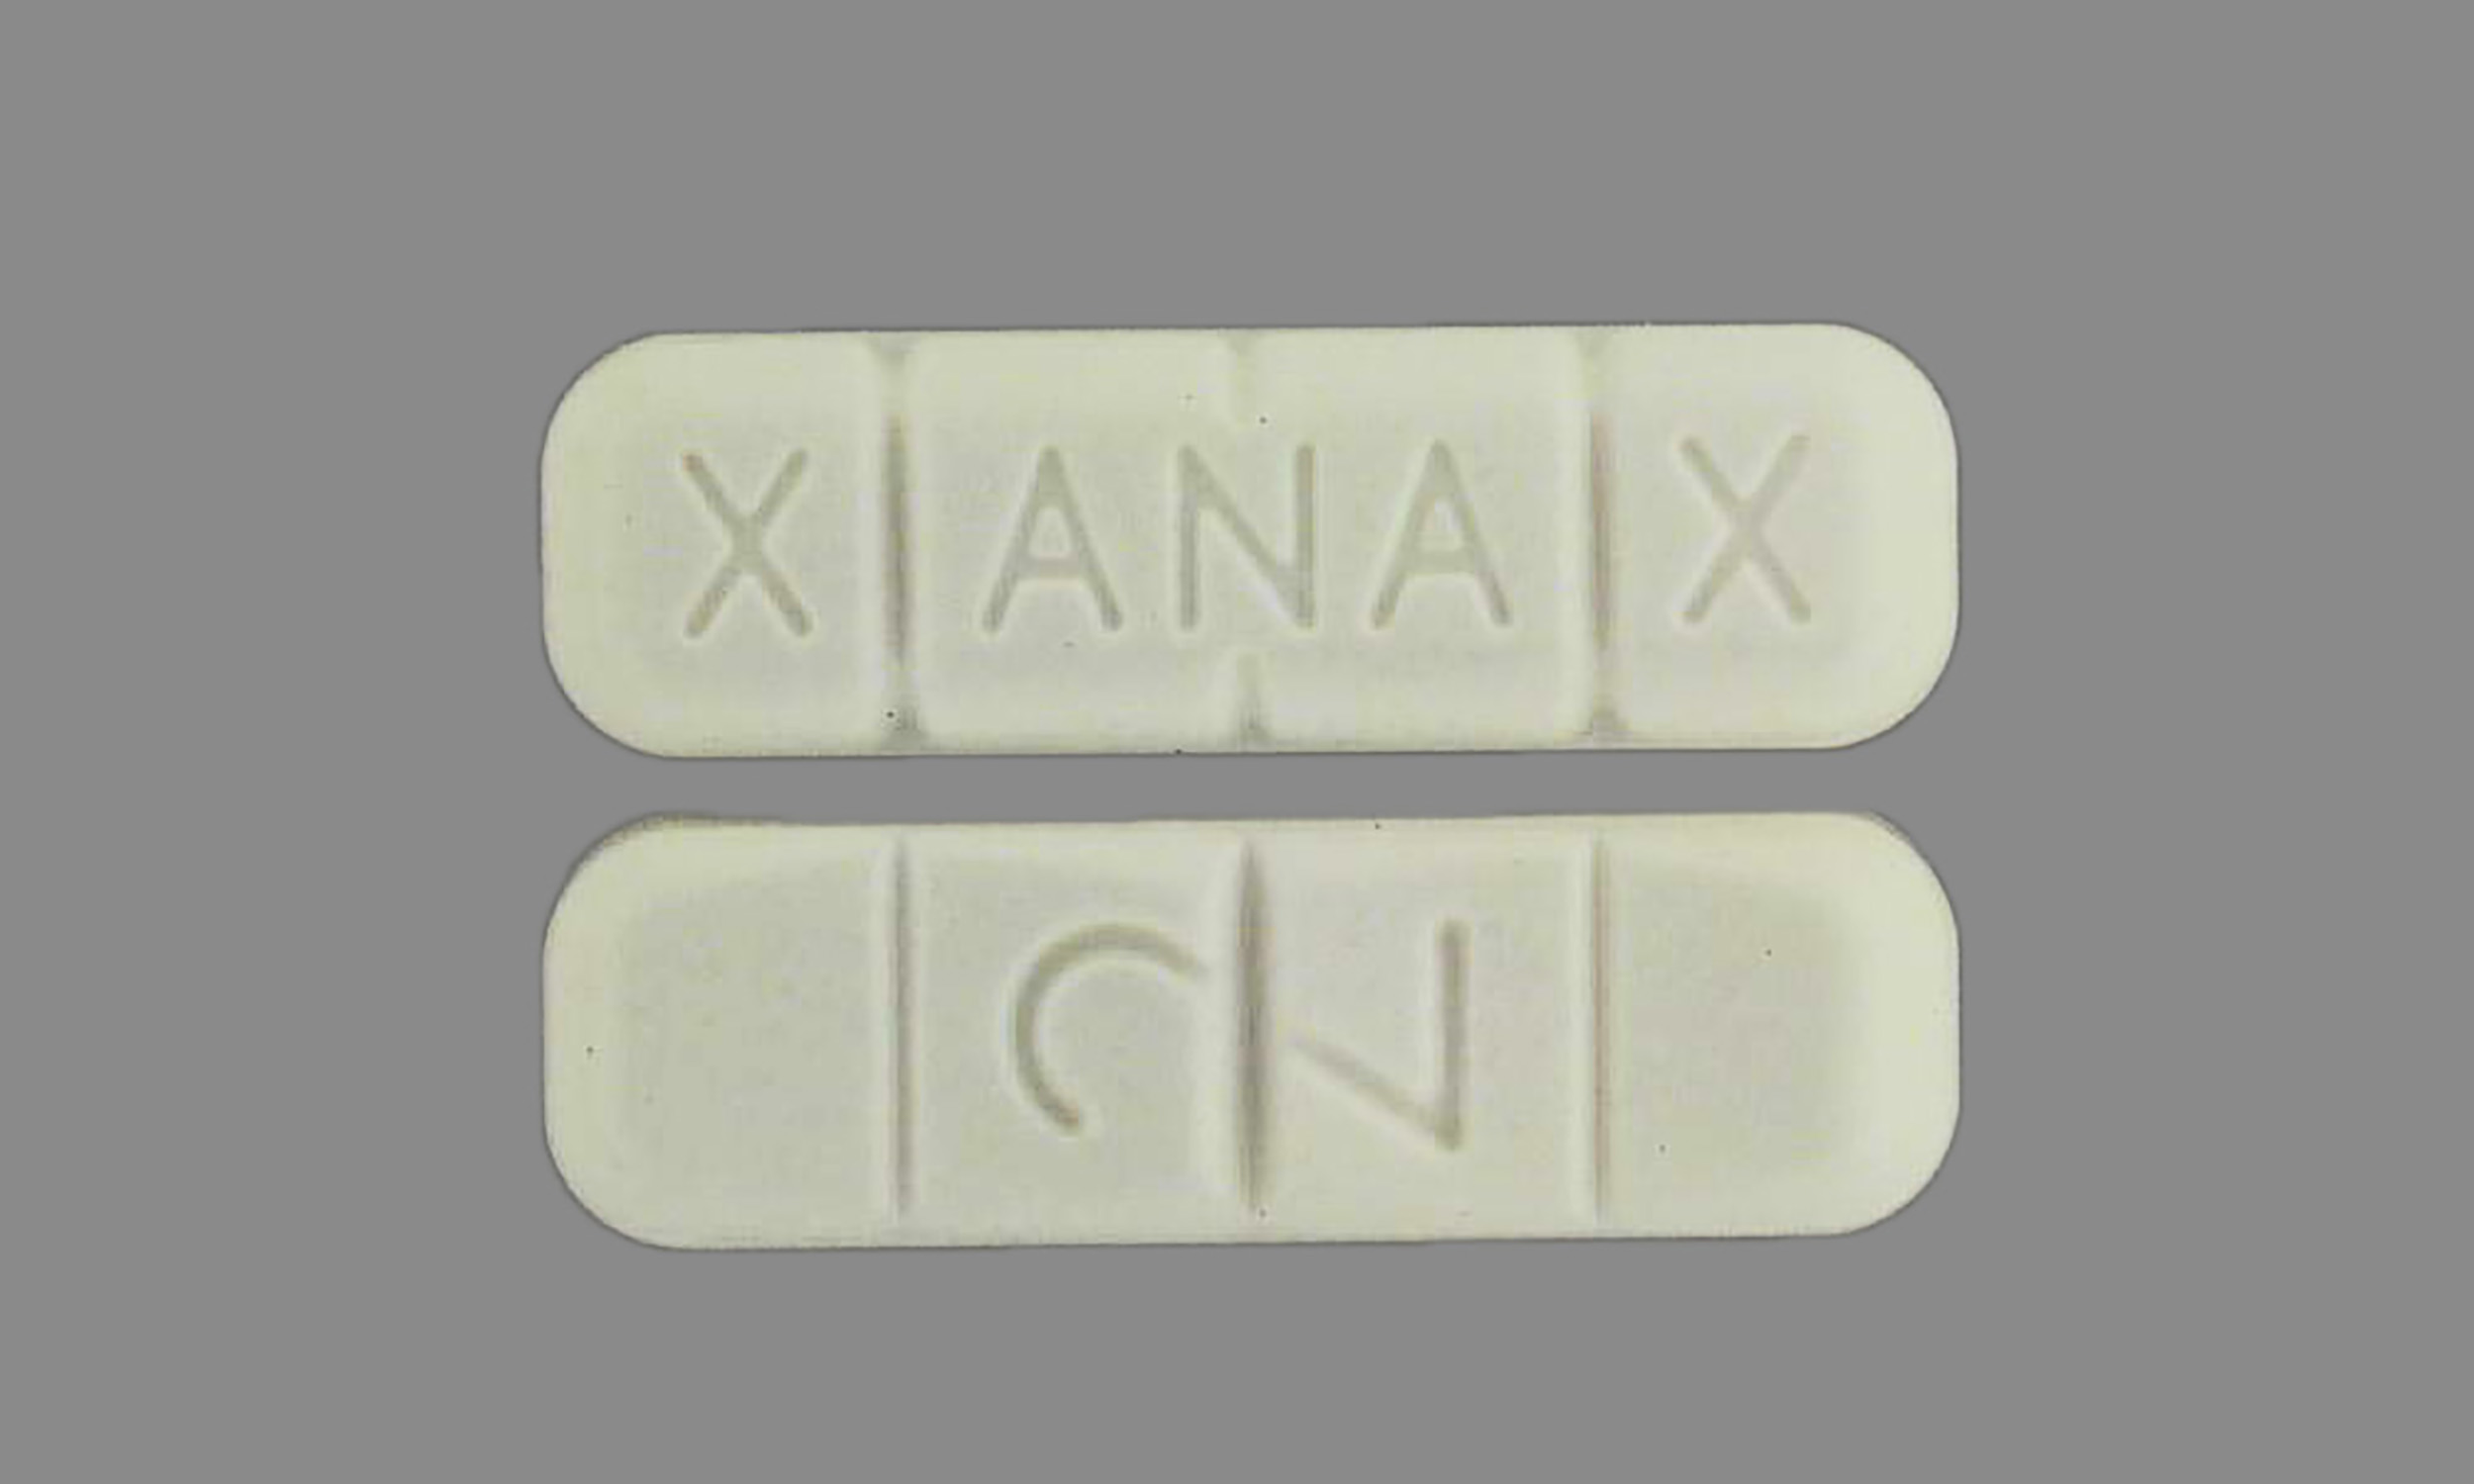 Free download Xanax That Says Xanax On It Top Picture Gallery [2500x1500] for your Desktop, Mobile & Tablet. Explore Xanax Wallpaper. Xanax Wallpaper